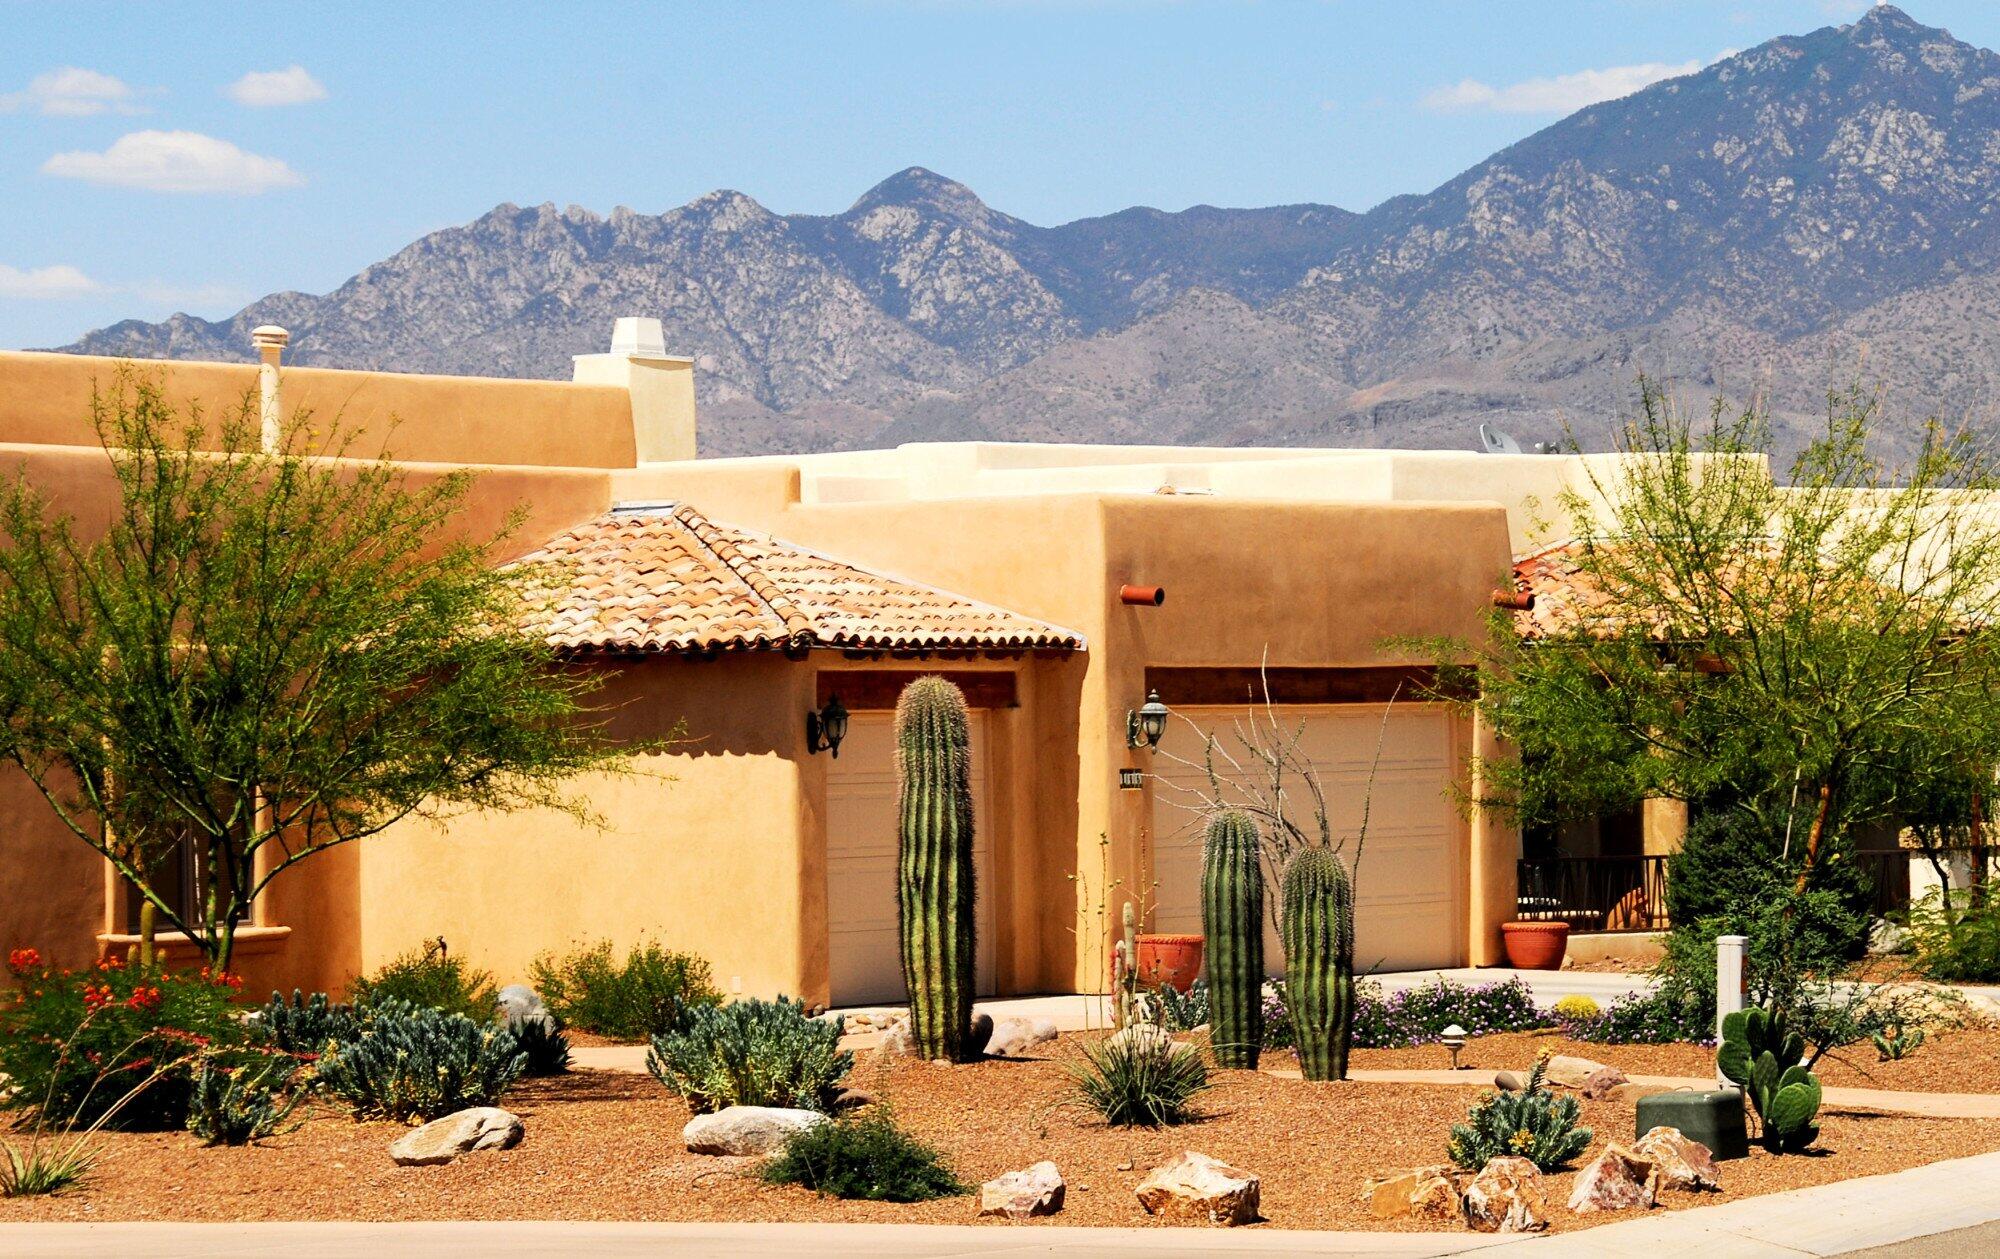 Rent-to-Own Homes: A Path to Homeownership in Las Vegas